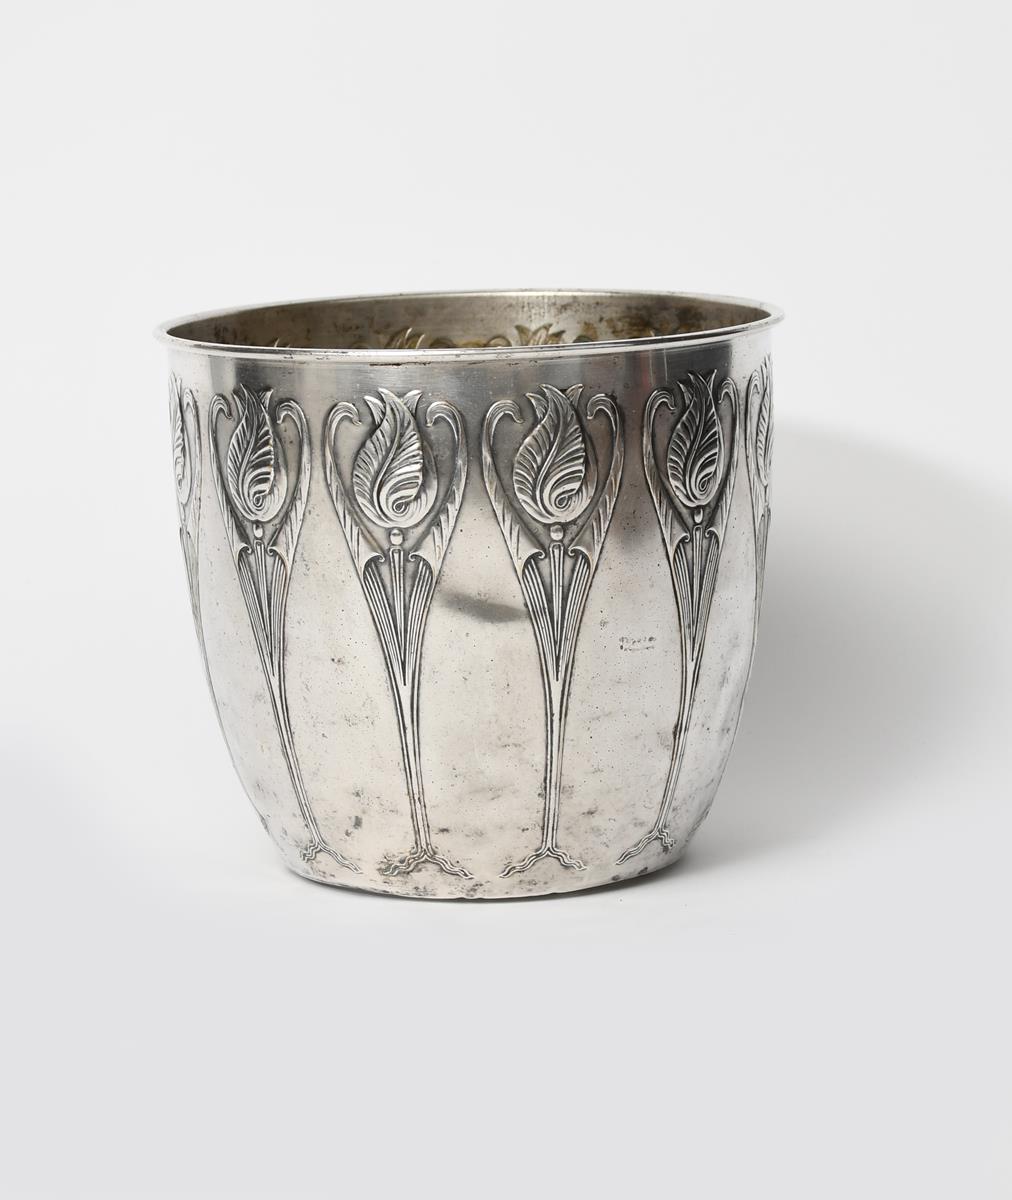 An Art Nouveau Dutch KMD Tiel pewter planter, flaring cylindrical form, cast in low relief with